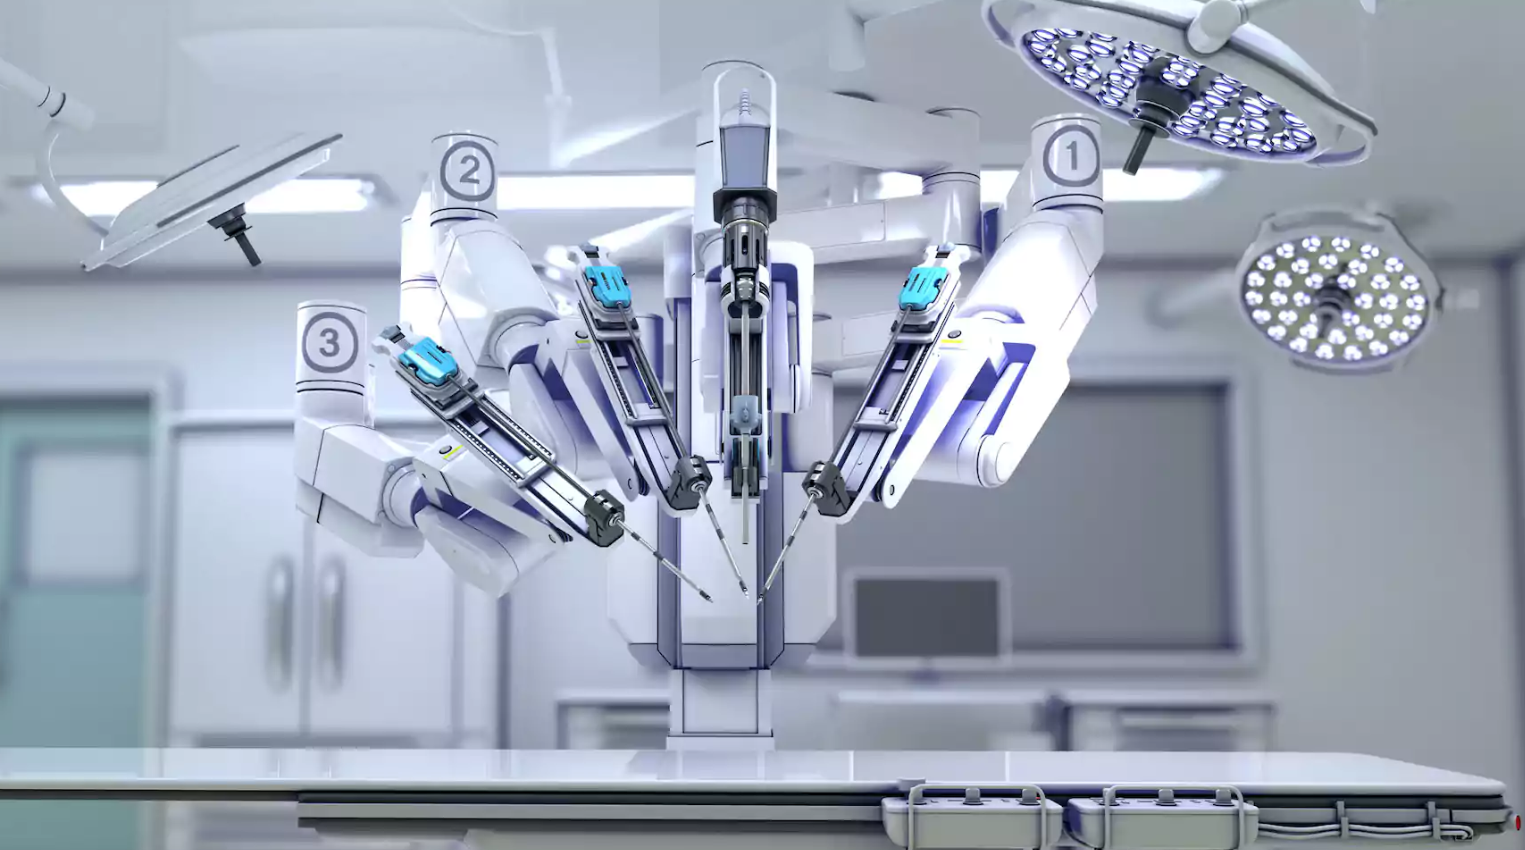 Johnson & Johnson to disclose robot-assisted surgery plans in May